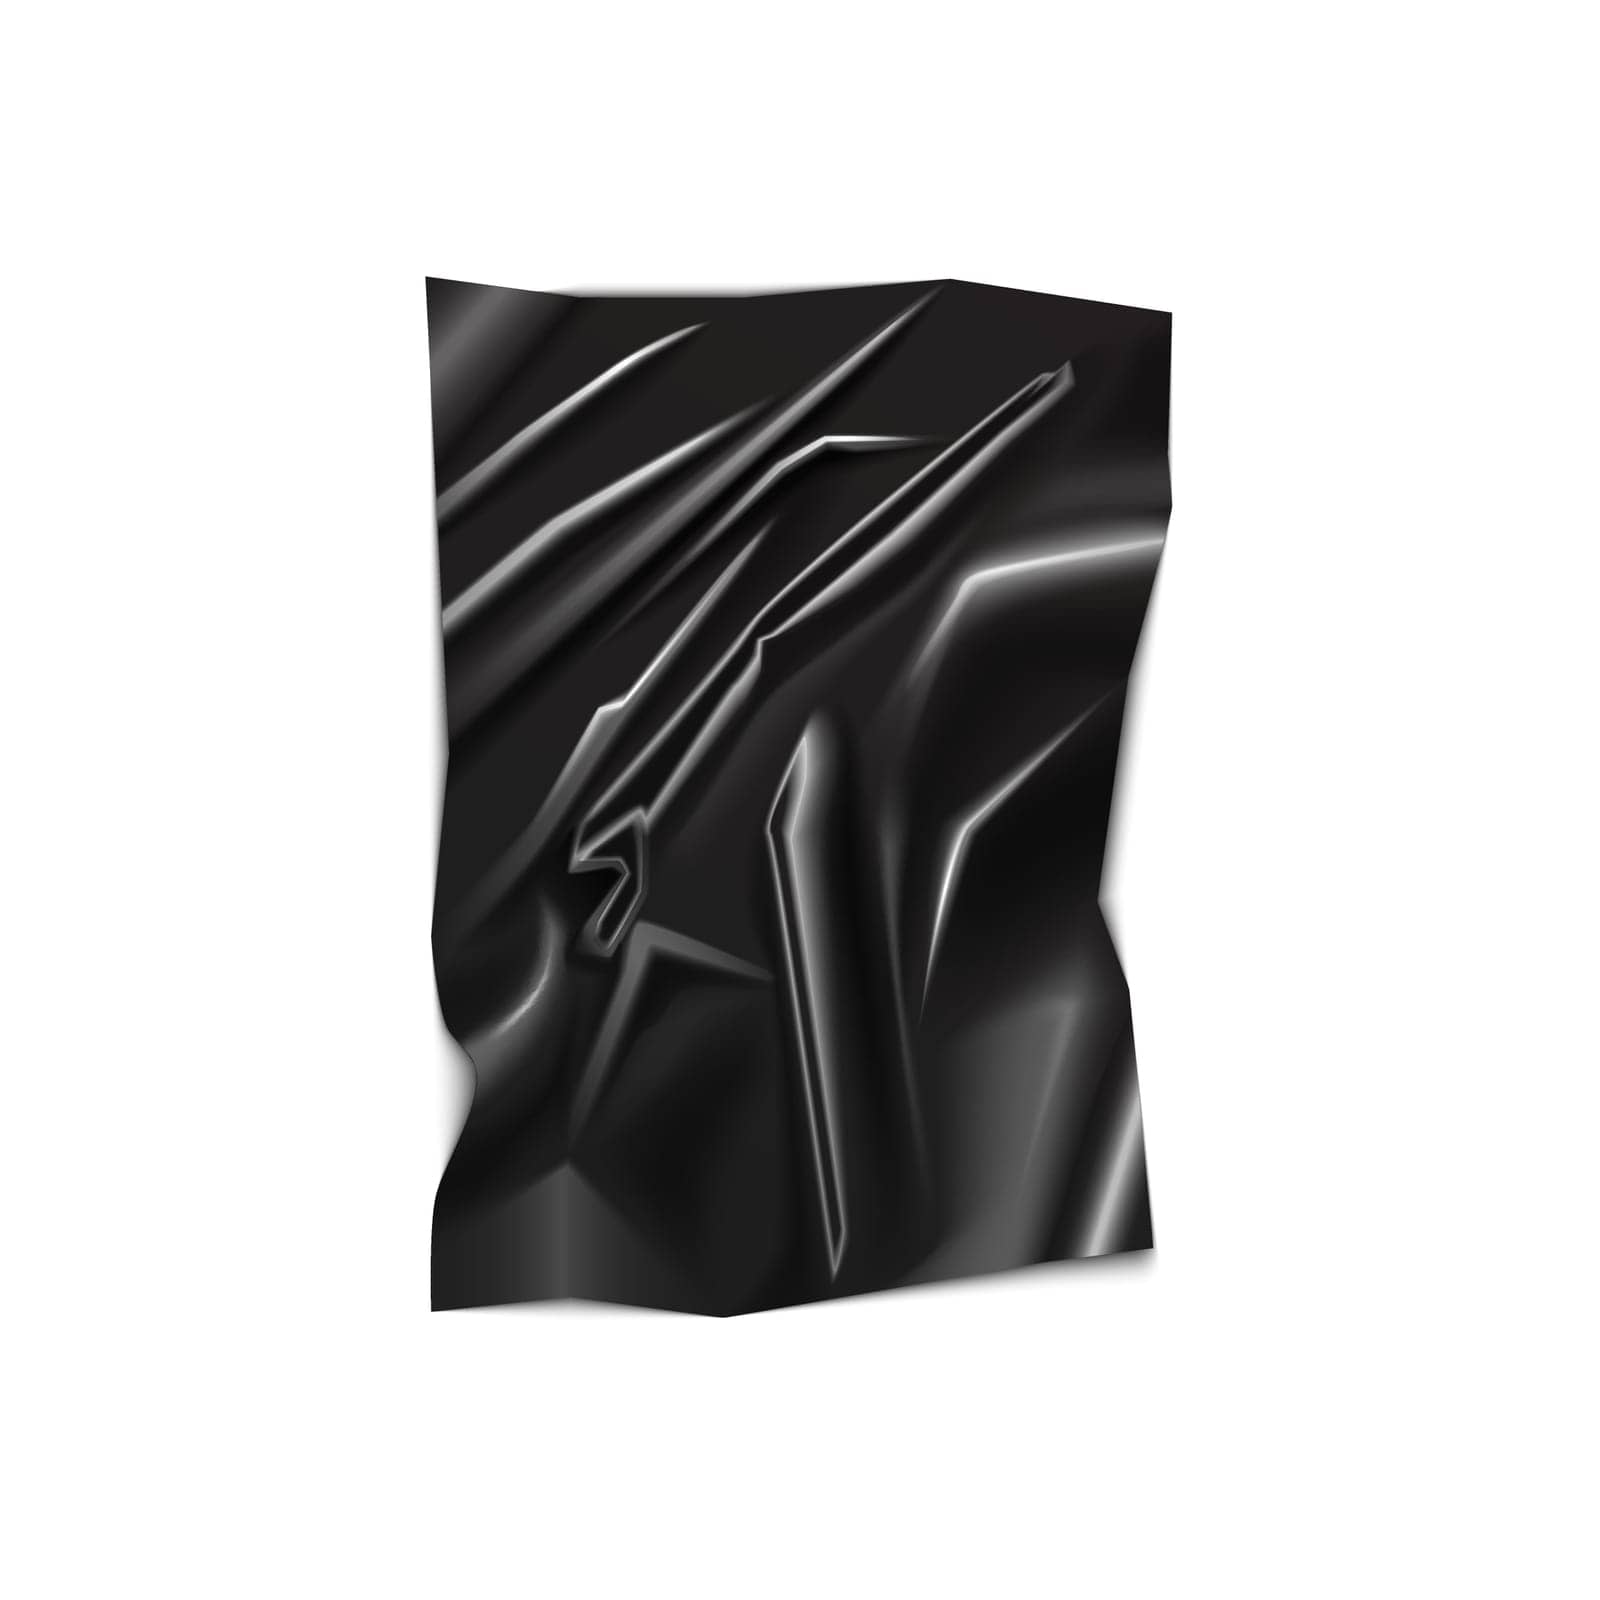 Black latex fabric, 3D polythene wrinkled cover with shine and wrinkles texture by Lembergvector